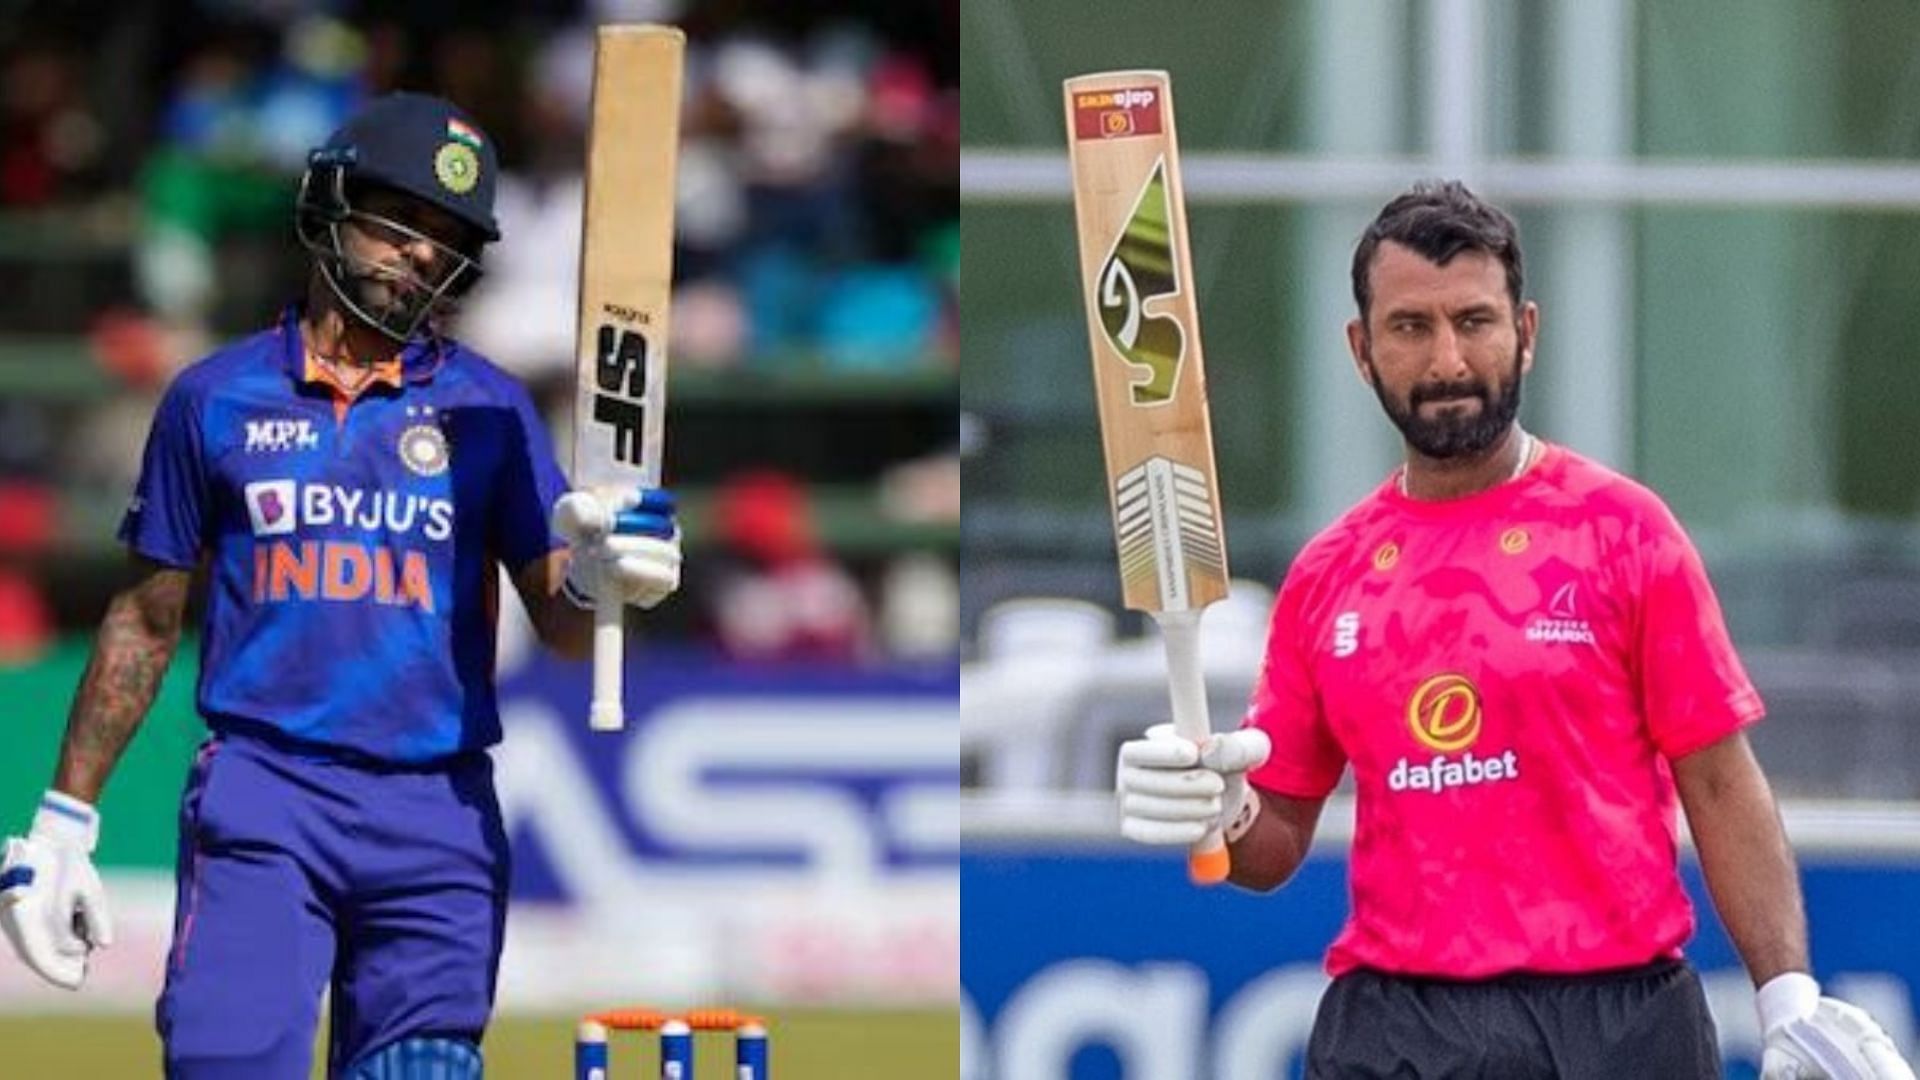 Shikhar Dhawan (L) and Cheteshwar Pujara have been piling on the runs wherever they have got the opportunity. (PC: Twitter)